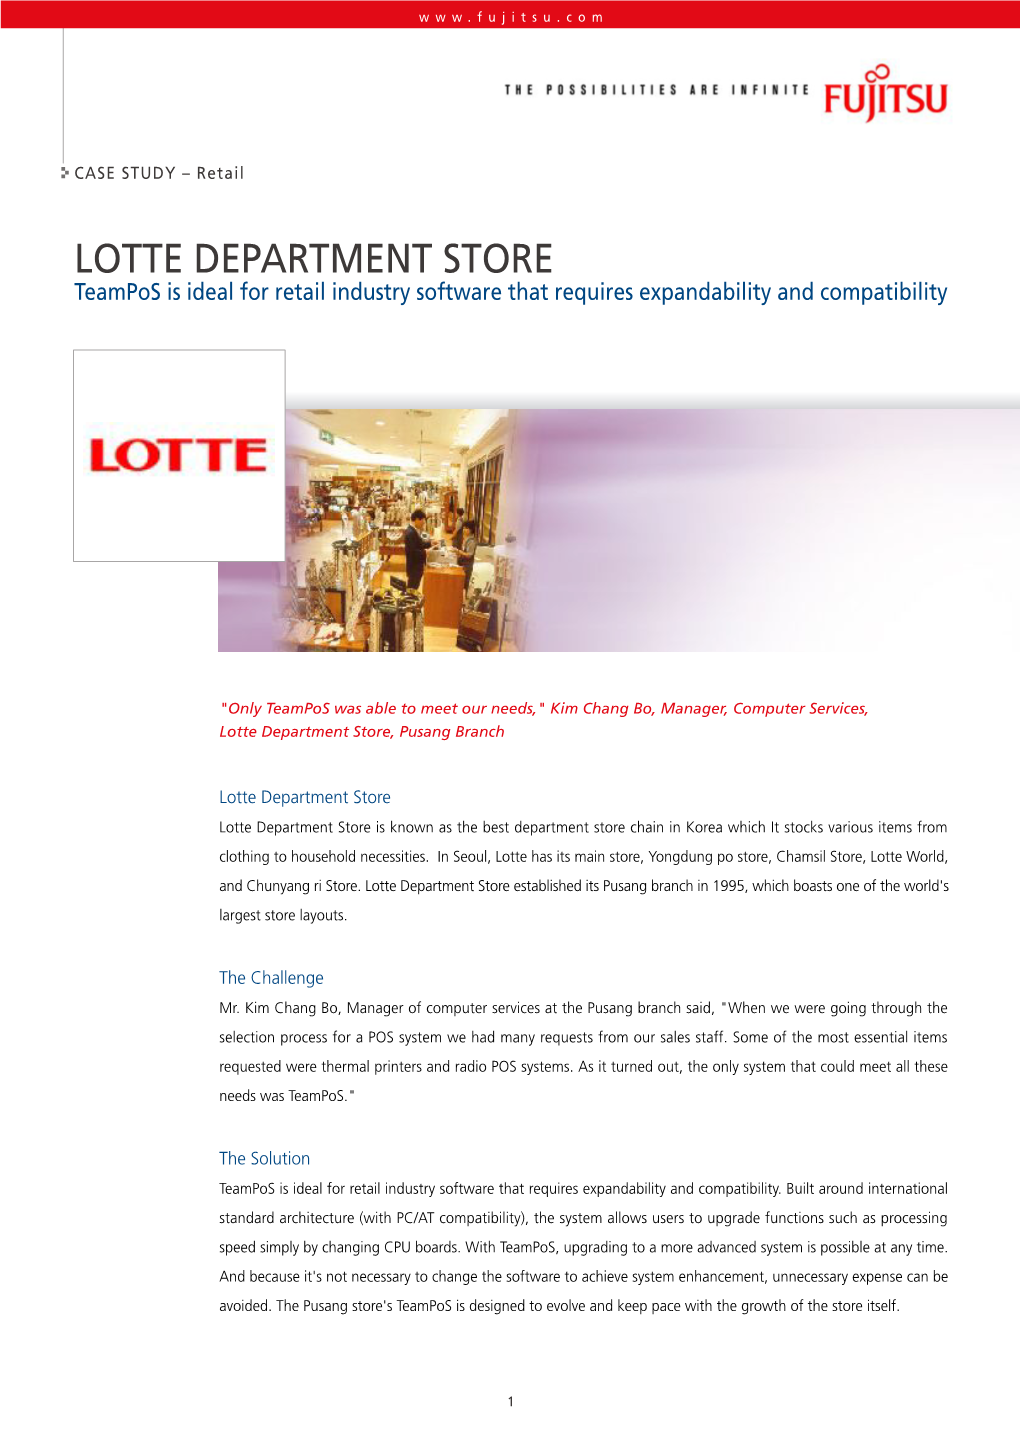 LOTTE DEPARTMENT STORE Teampos Is Ideal for Retail Industry Software That Requires Expandability and Compatibility